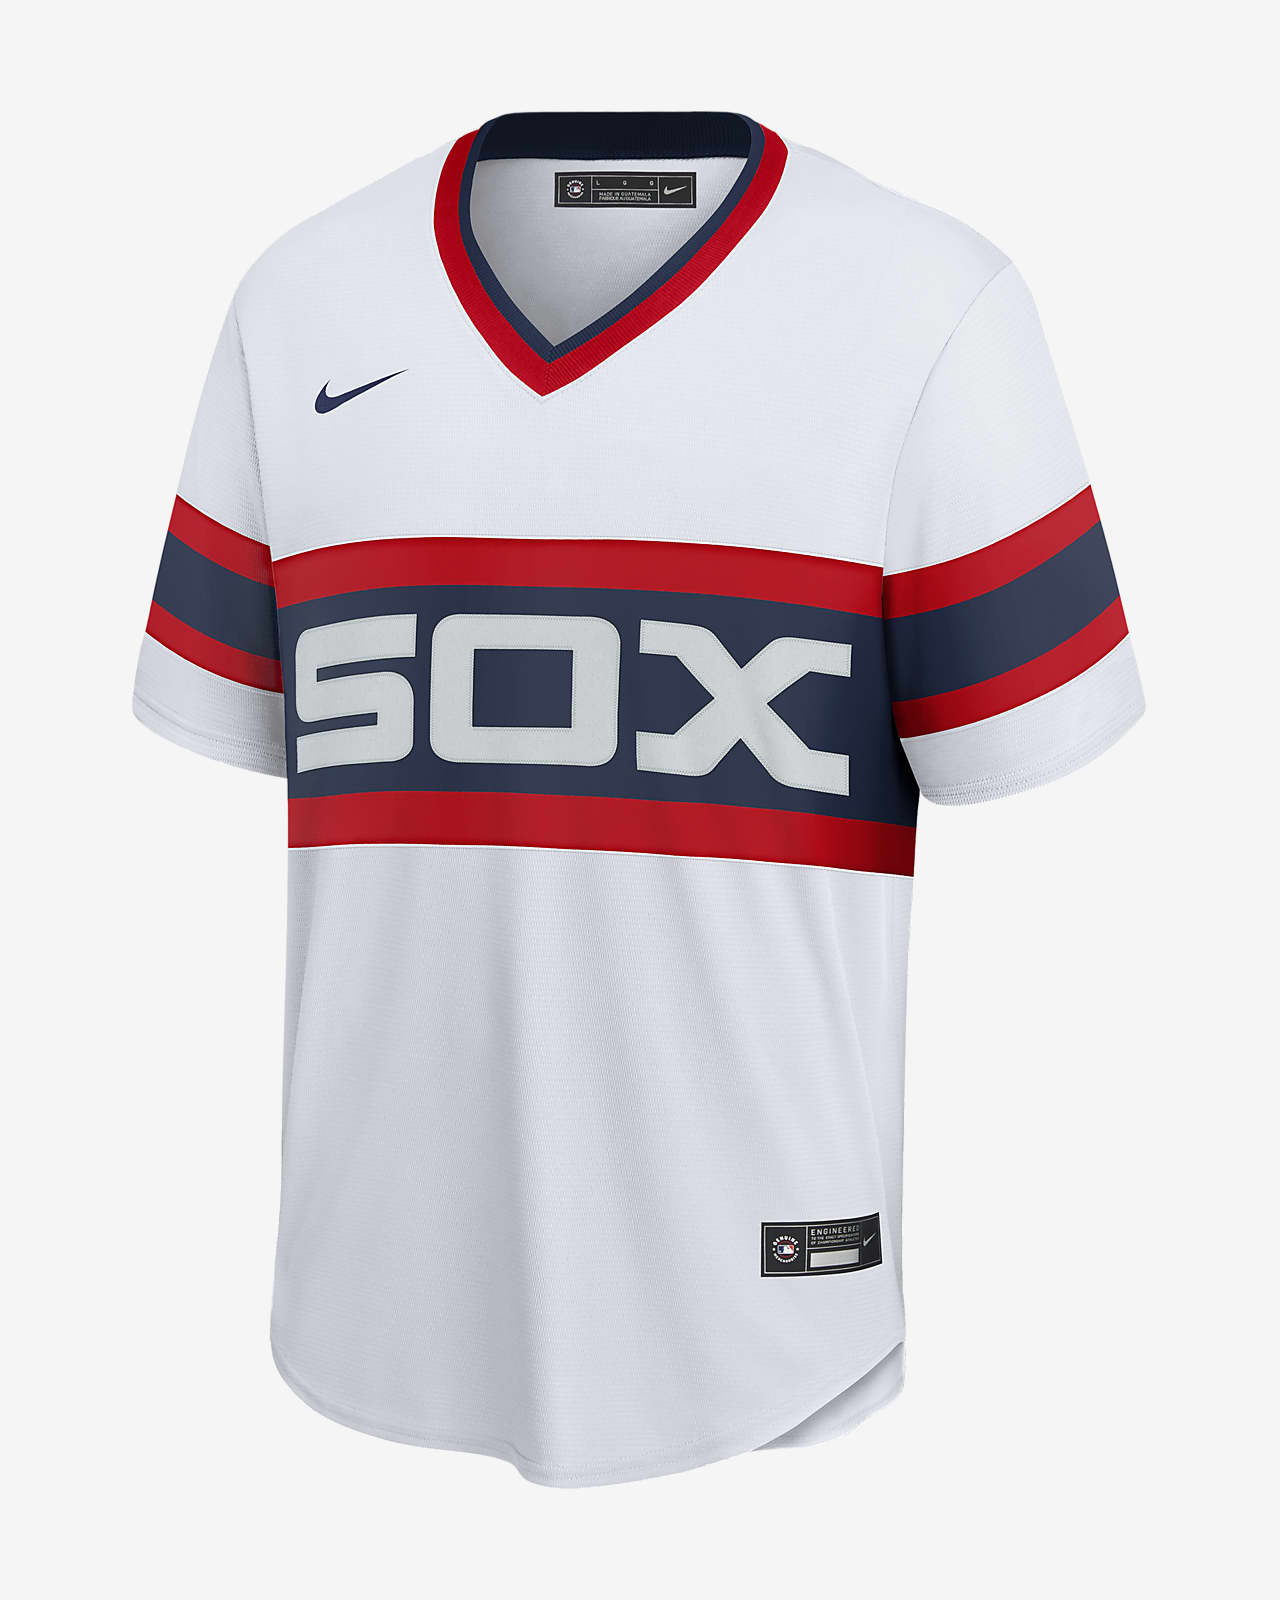 Chicago White Sox Baby Apparel, Baby White Sox Clothing